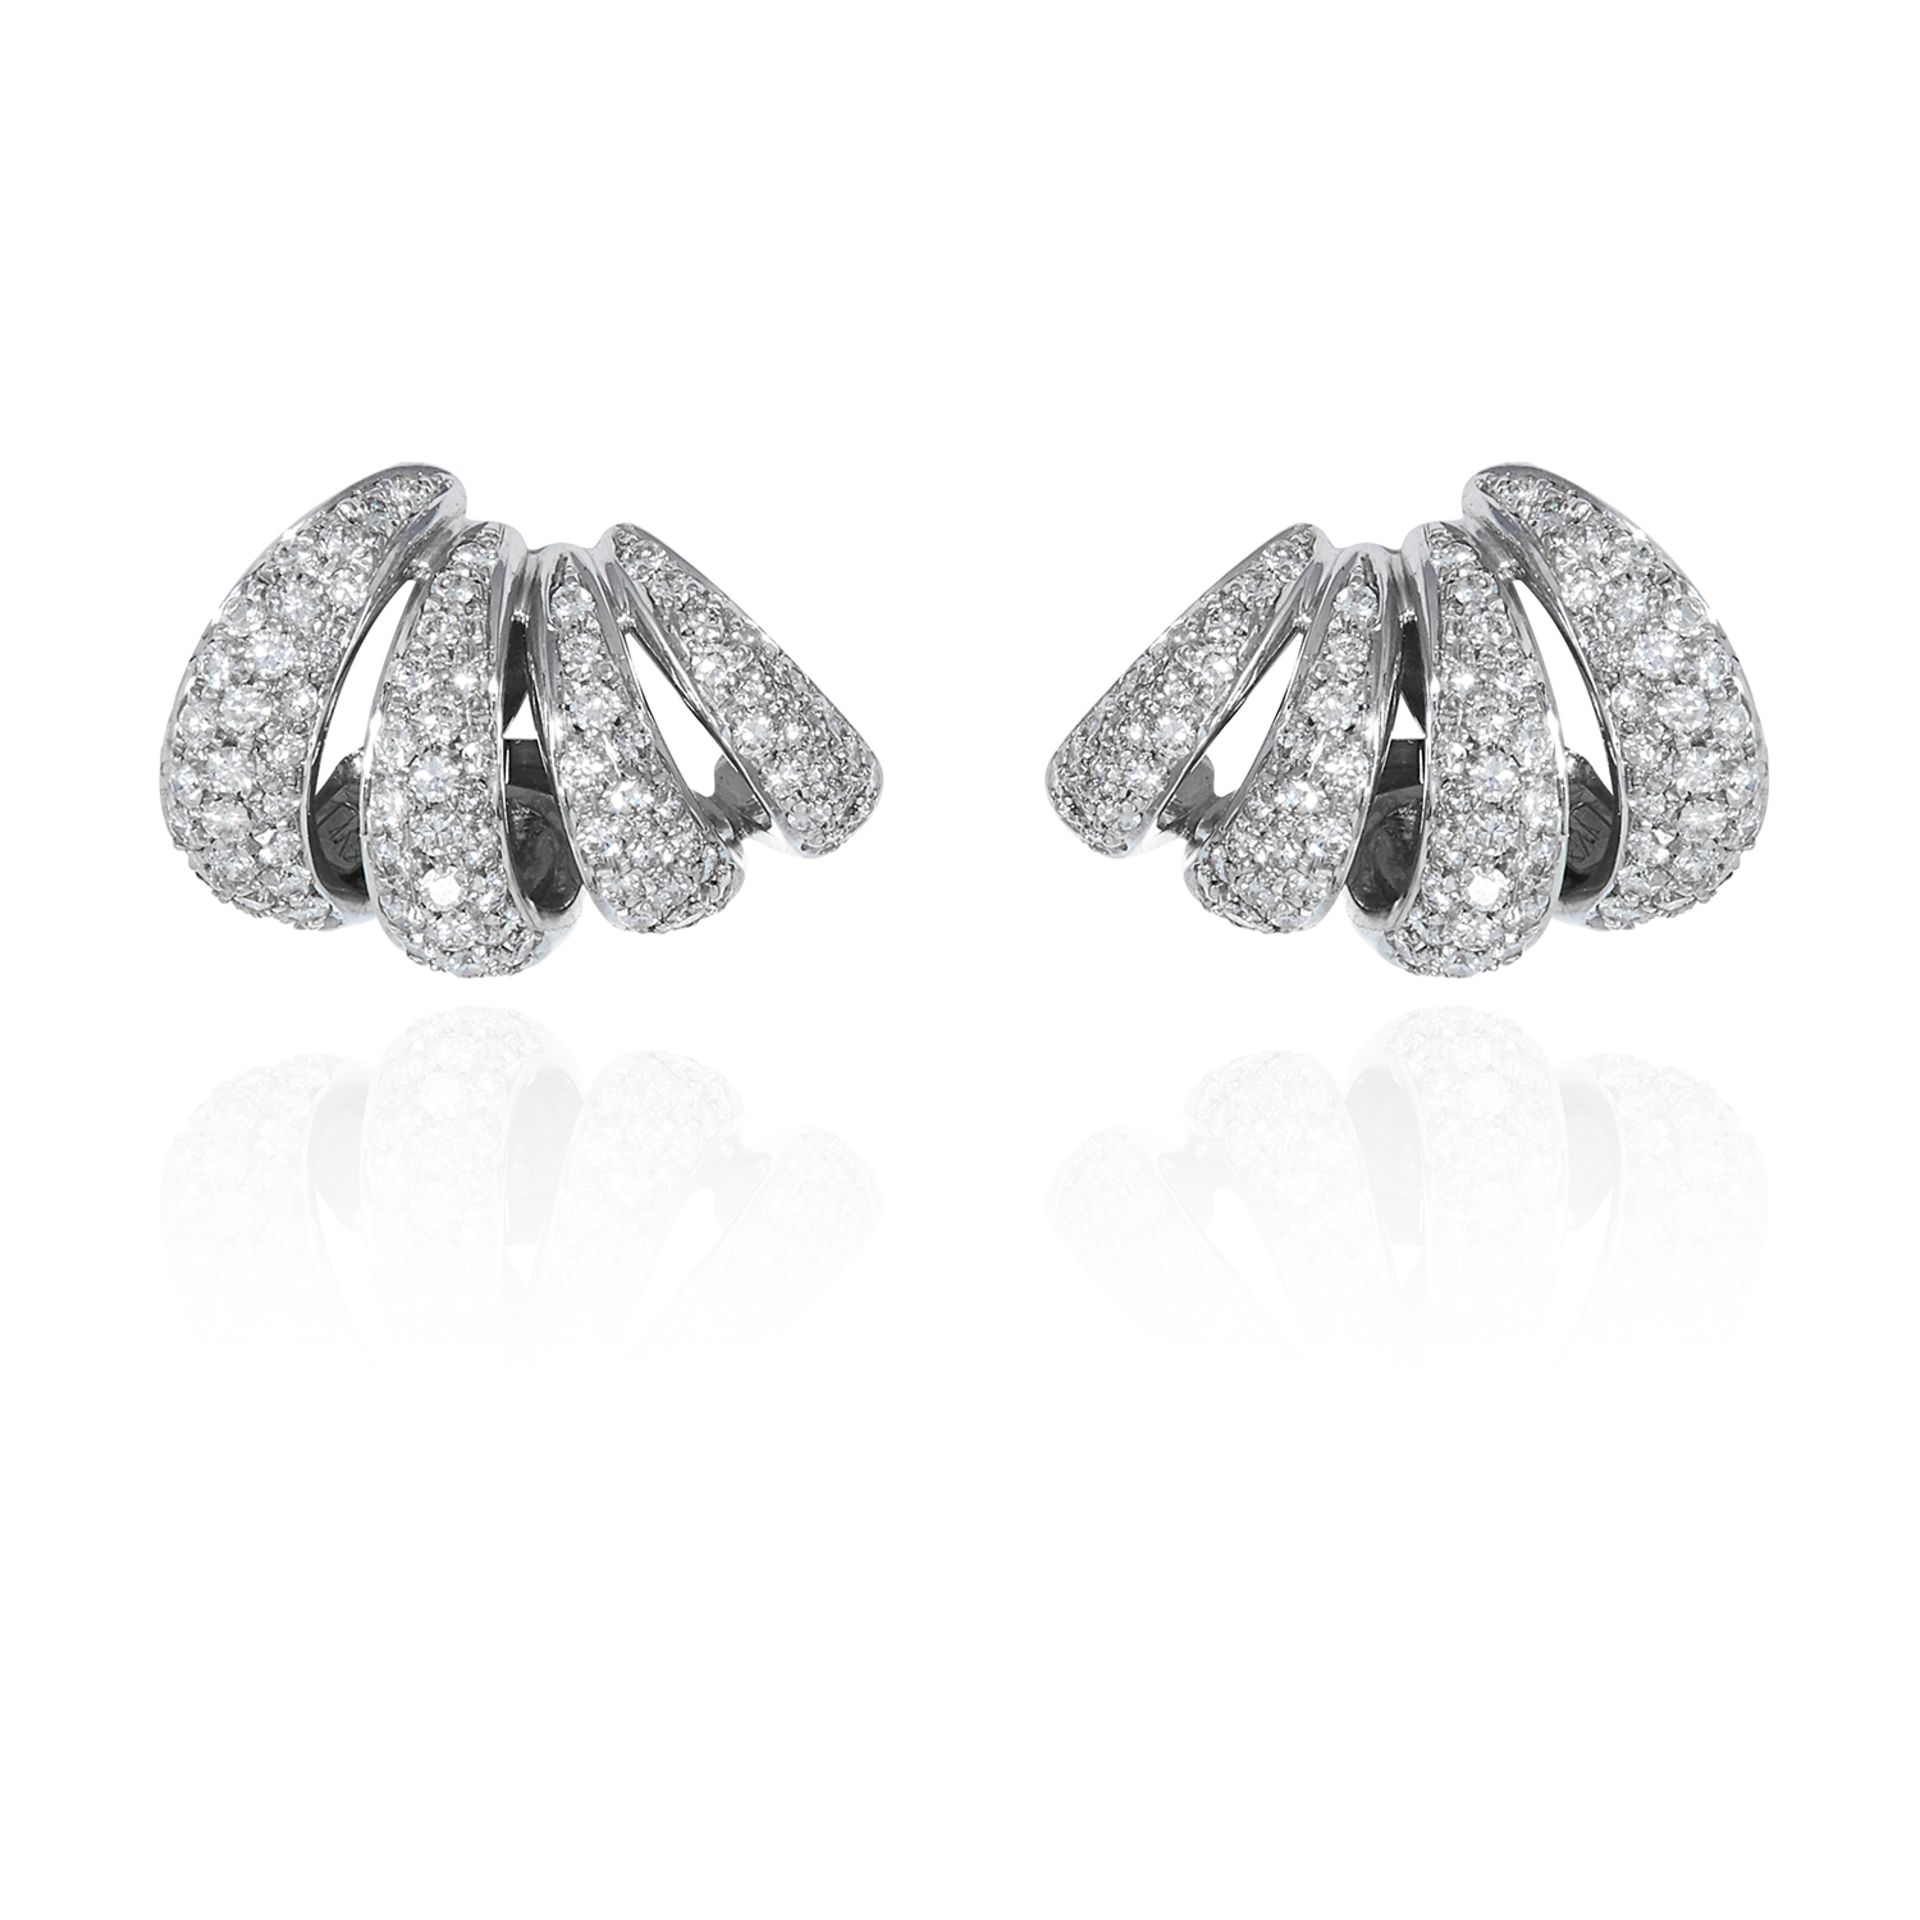 A PAIR OF DIAMOND EARRINGS in 18ct white gold, each comprising four graduated bands set with